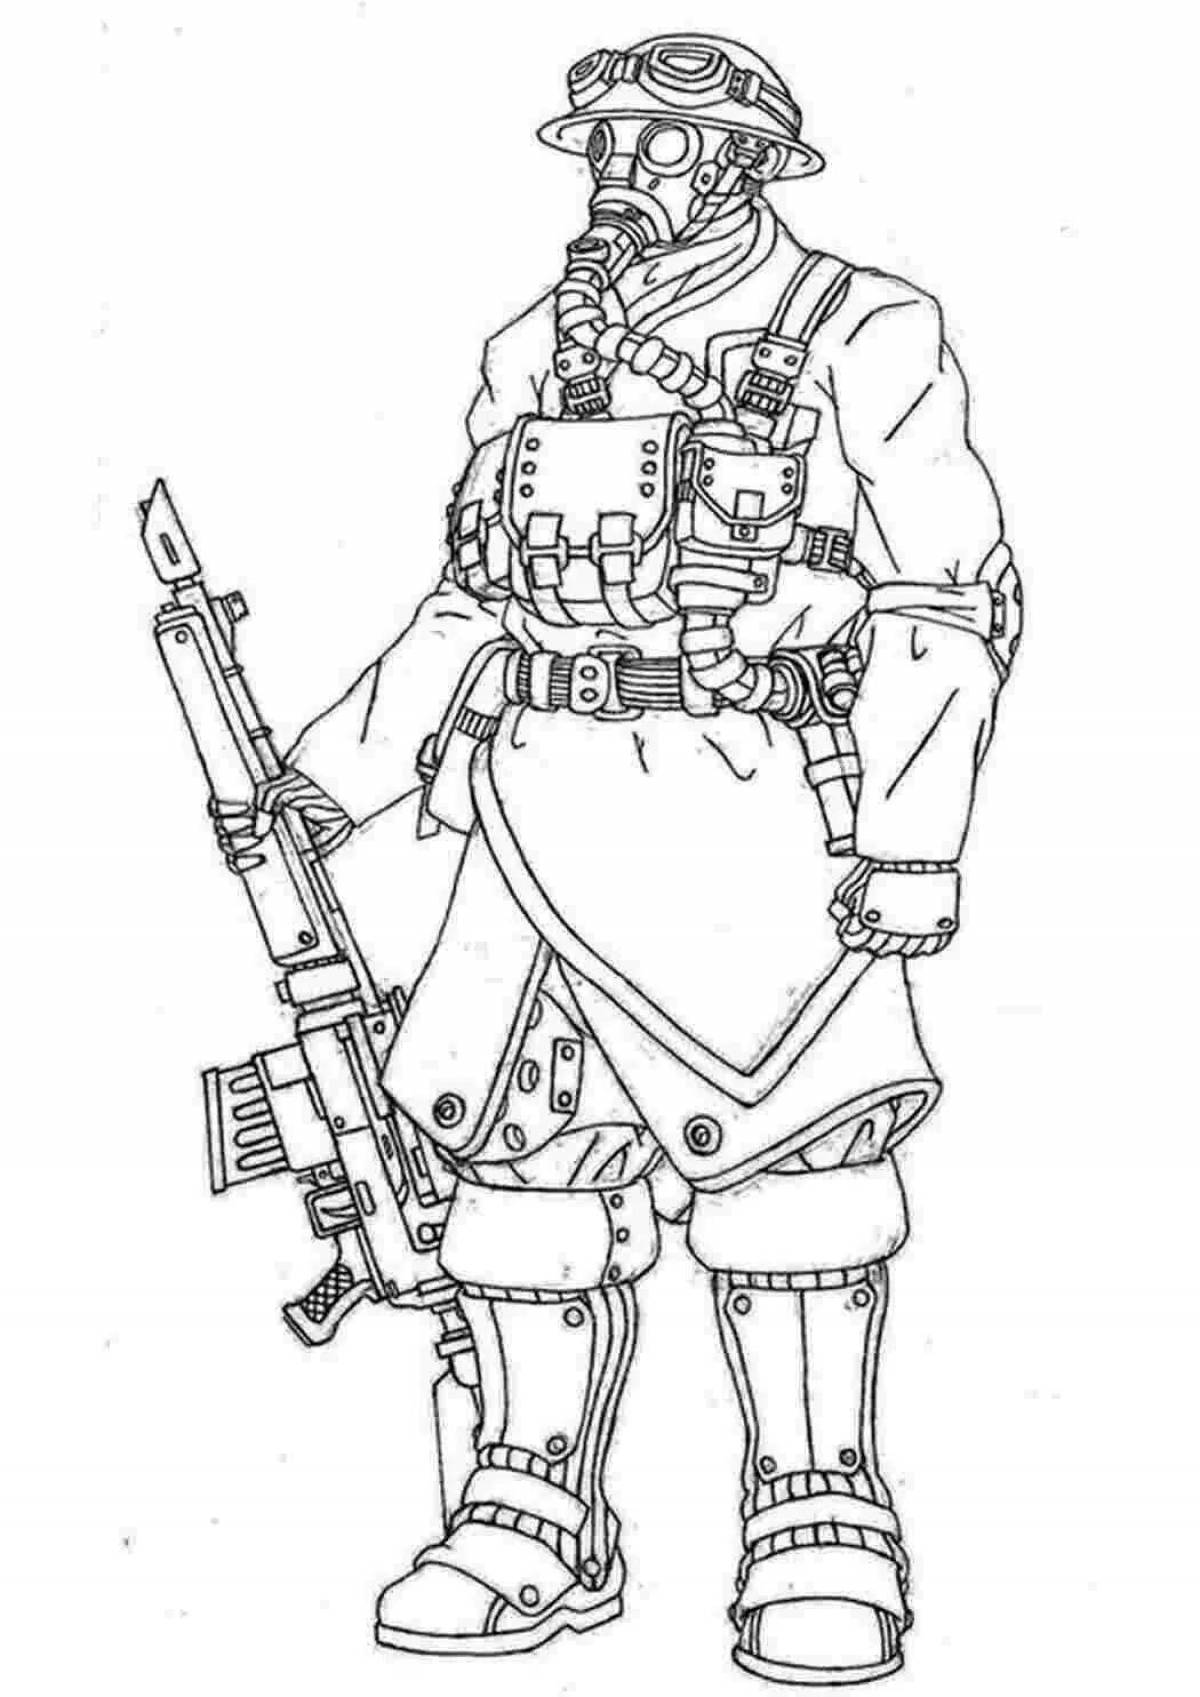 Exquisite toy soldiers coloring pages for boys